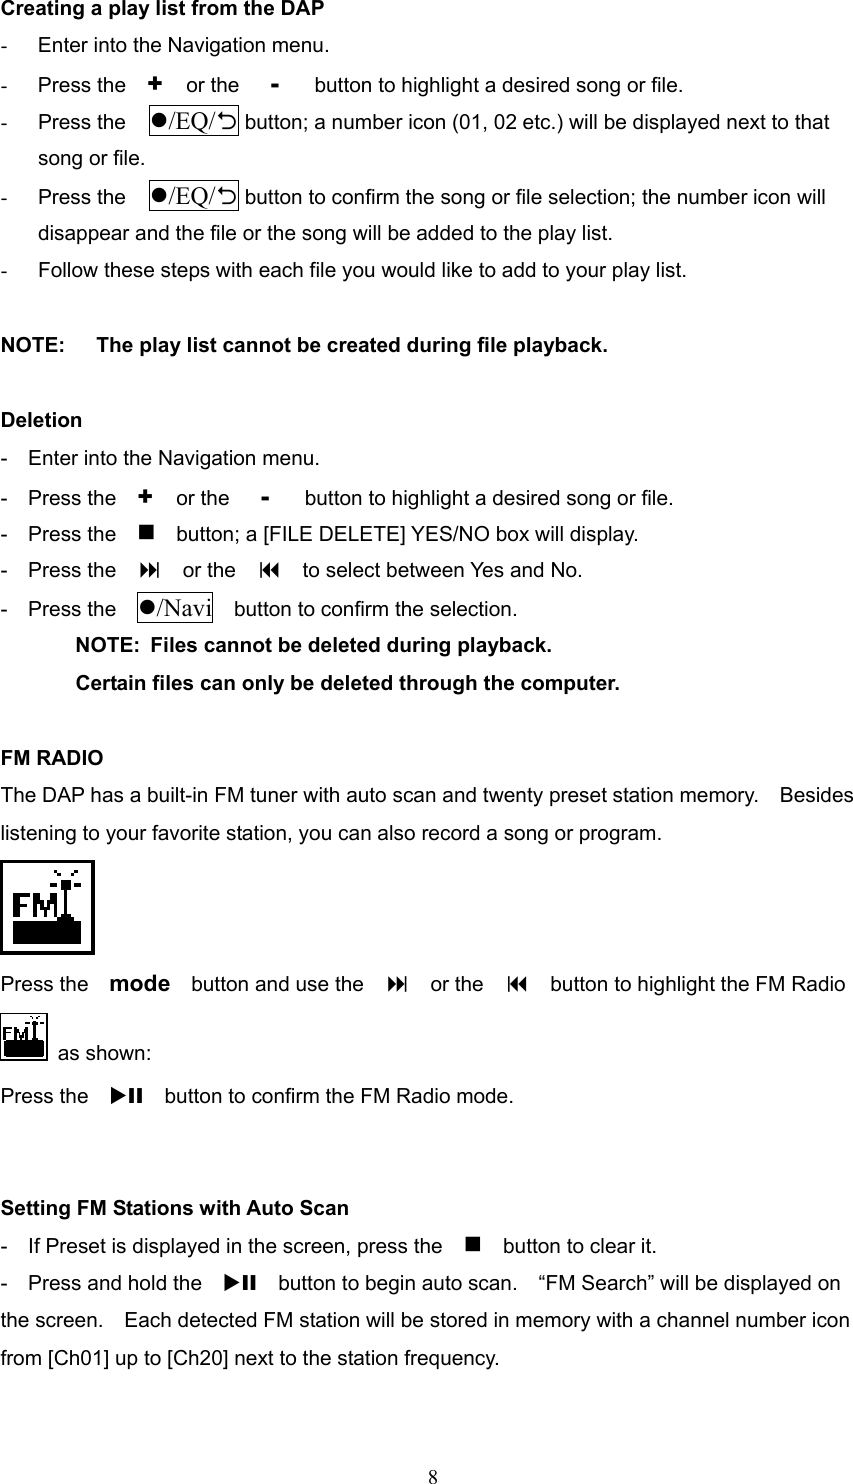  8Creating a play list from the DAP -  Enter into the Navigation menu. -  Press the    +   or the   -    button to highlight a desired song or file. -  Press the  /EQ/2 button; a number icon (01, 02 etc.) will be displayed next to that song or file. -  Press the  /EQ/2 button to confirm the song or file selection; the number icon will disappear and the file or the song will be added to the play list. -  Follow these steps with each file you would like to add to your play list.  NOTE:      The play list cannot be created during file playback.  Deletion -    Enter into the Navigation menu. -  Press the  +   or the   -    button to highlight a desired song or file. -  Press the      button; a [FILE DELETE] YES/NO box will display. -  Press the    or the      to select between Yes and No. -  Press the  /Navi    button to confirm the selection.  NOTE:  Files cannot be deleted during playback.   Certain files can only be deleted through the computer.  FM RADIO The DAP has a built-in FM tuner with auto scan and twenty preset station memory.    Besides listening to your favorite station, you can also record a song or program.  Press the    mode    button and use the      or the      button to highlight the FM Radio    as shown:   Press the    XII    button to confirm the FM Radio mode.   Setting FM Stations with Auto Scan -    If Preset is displayed in the screen, press the        button to clear it.   -  Press and hold the  XII    button to begin auto scan.    “FM Search” will be displayed on the screen.    Each detected FM station will be stored in memory with a channel number icon from [Ch01] up to [Ch20] next to the station frequency.  